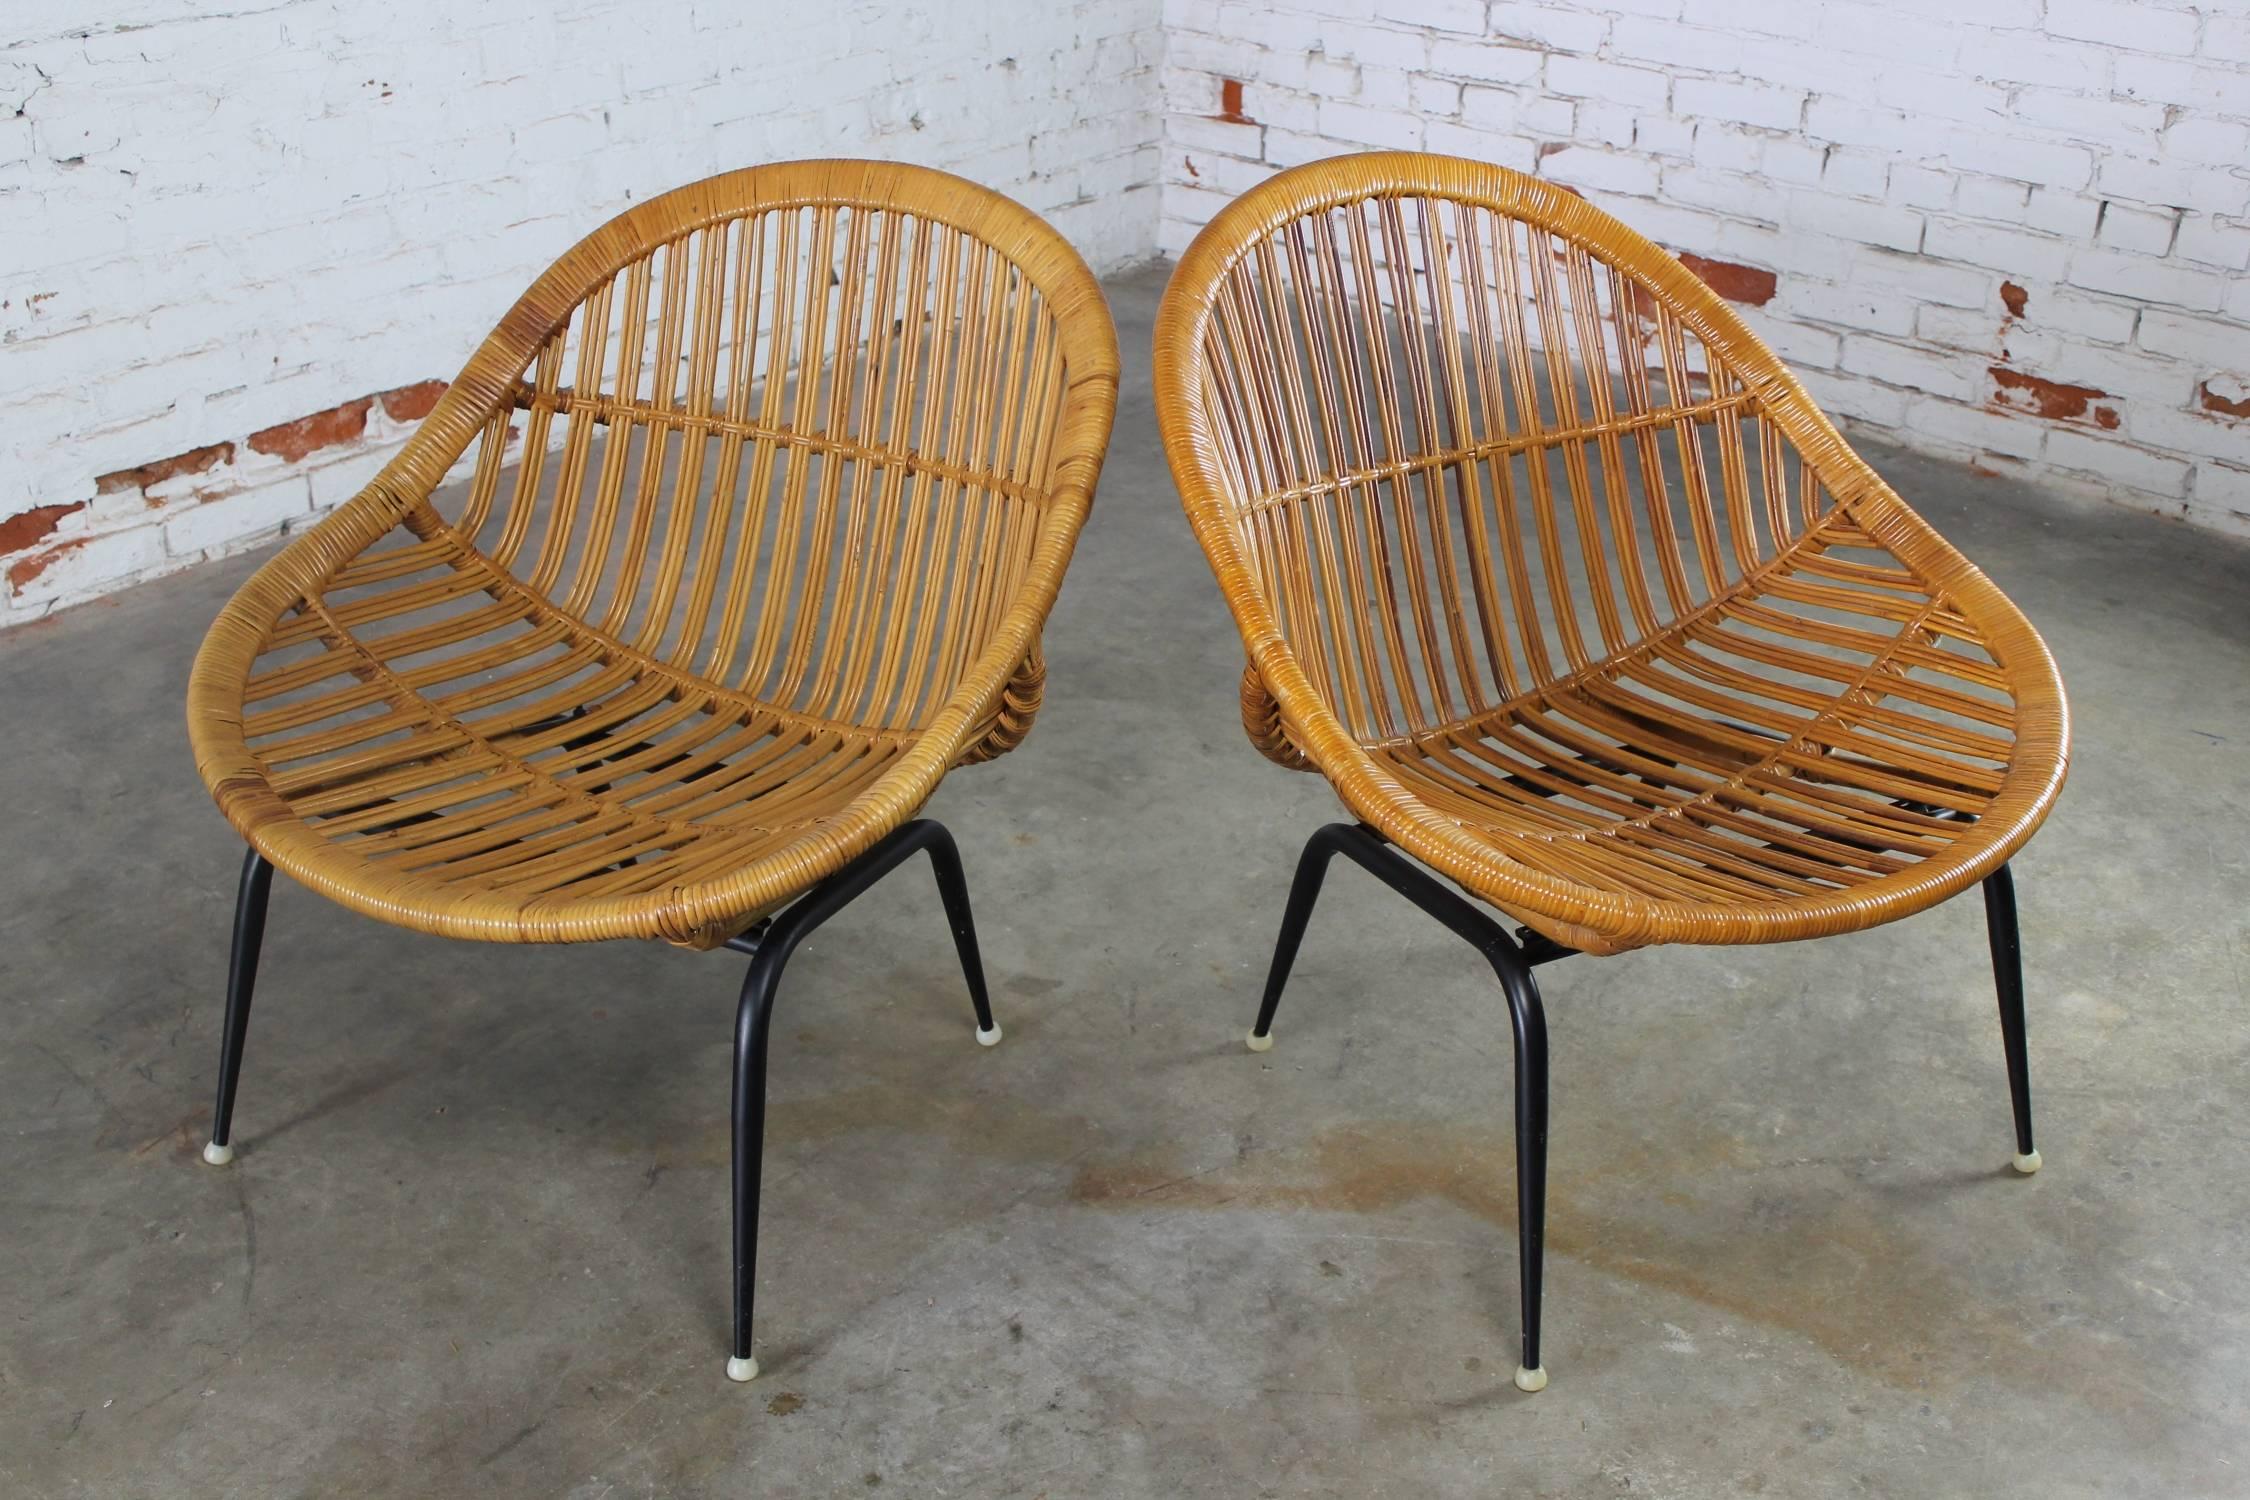 Metal Pair of Mid-Century Modern Rattan Wicker Basket Chairs by Troy Sunshade Company